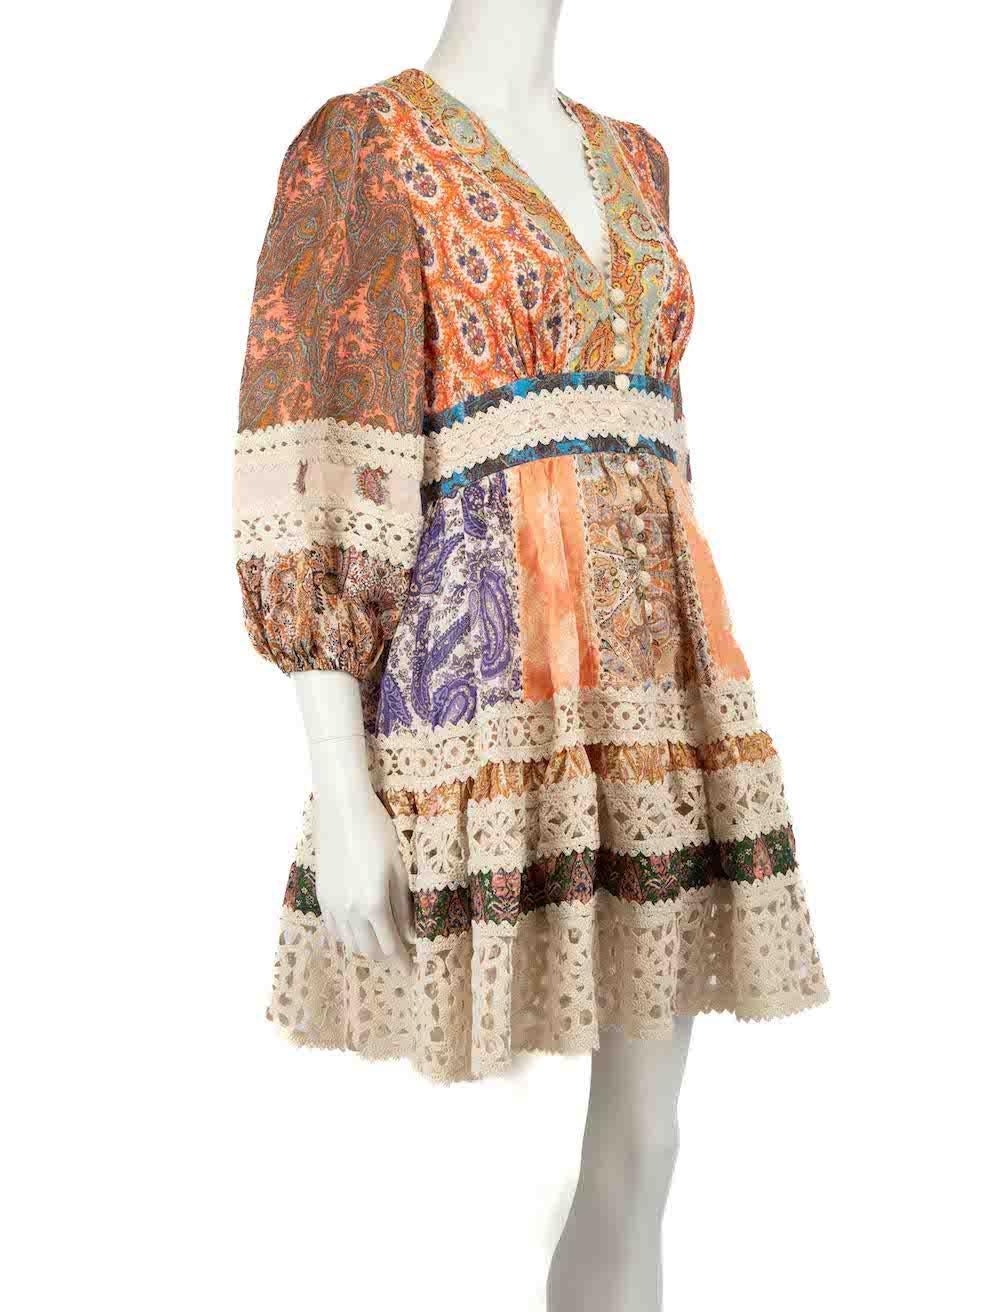 CONDITION is Never worn, with tags. No visible wear to dress is evident on this new Zimmermann designer resale item.
 
 
 
 Details
 
 
 Devi Spliced Billow model
 
 Multicolour
 
 Linen
 
 Mini dress
 
 V neckline
 
 Front button up closure
 
